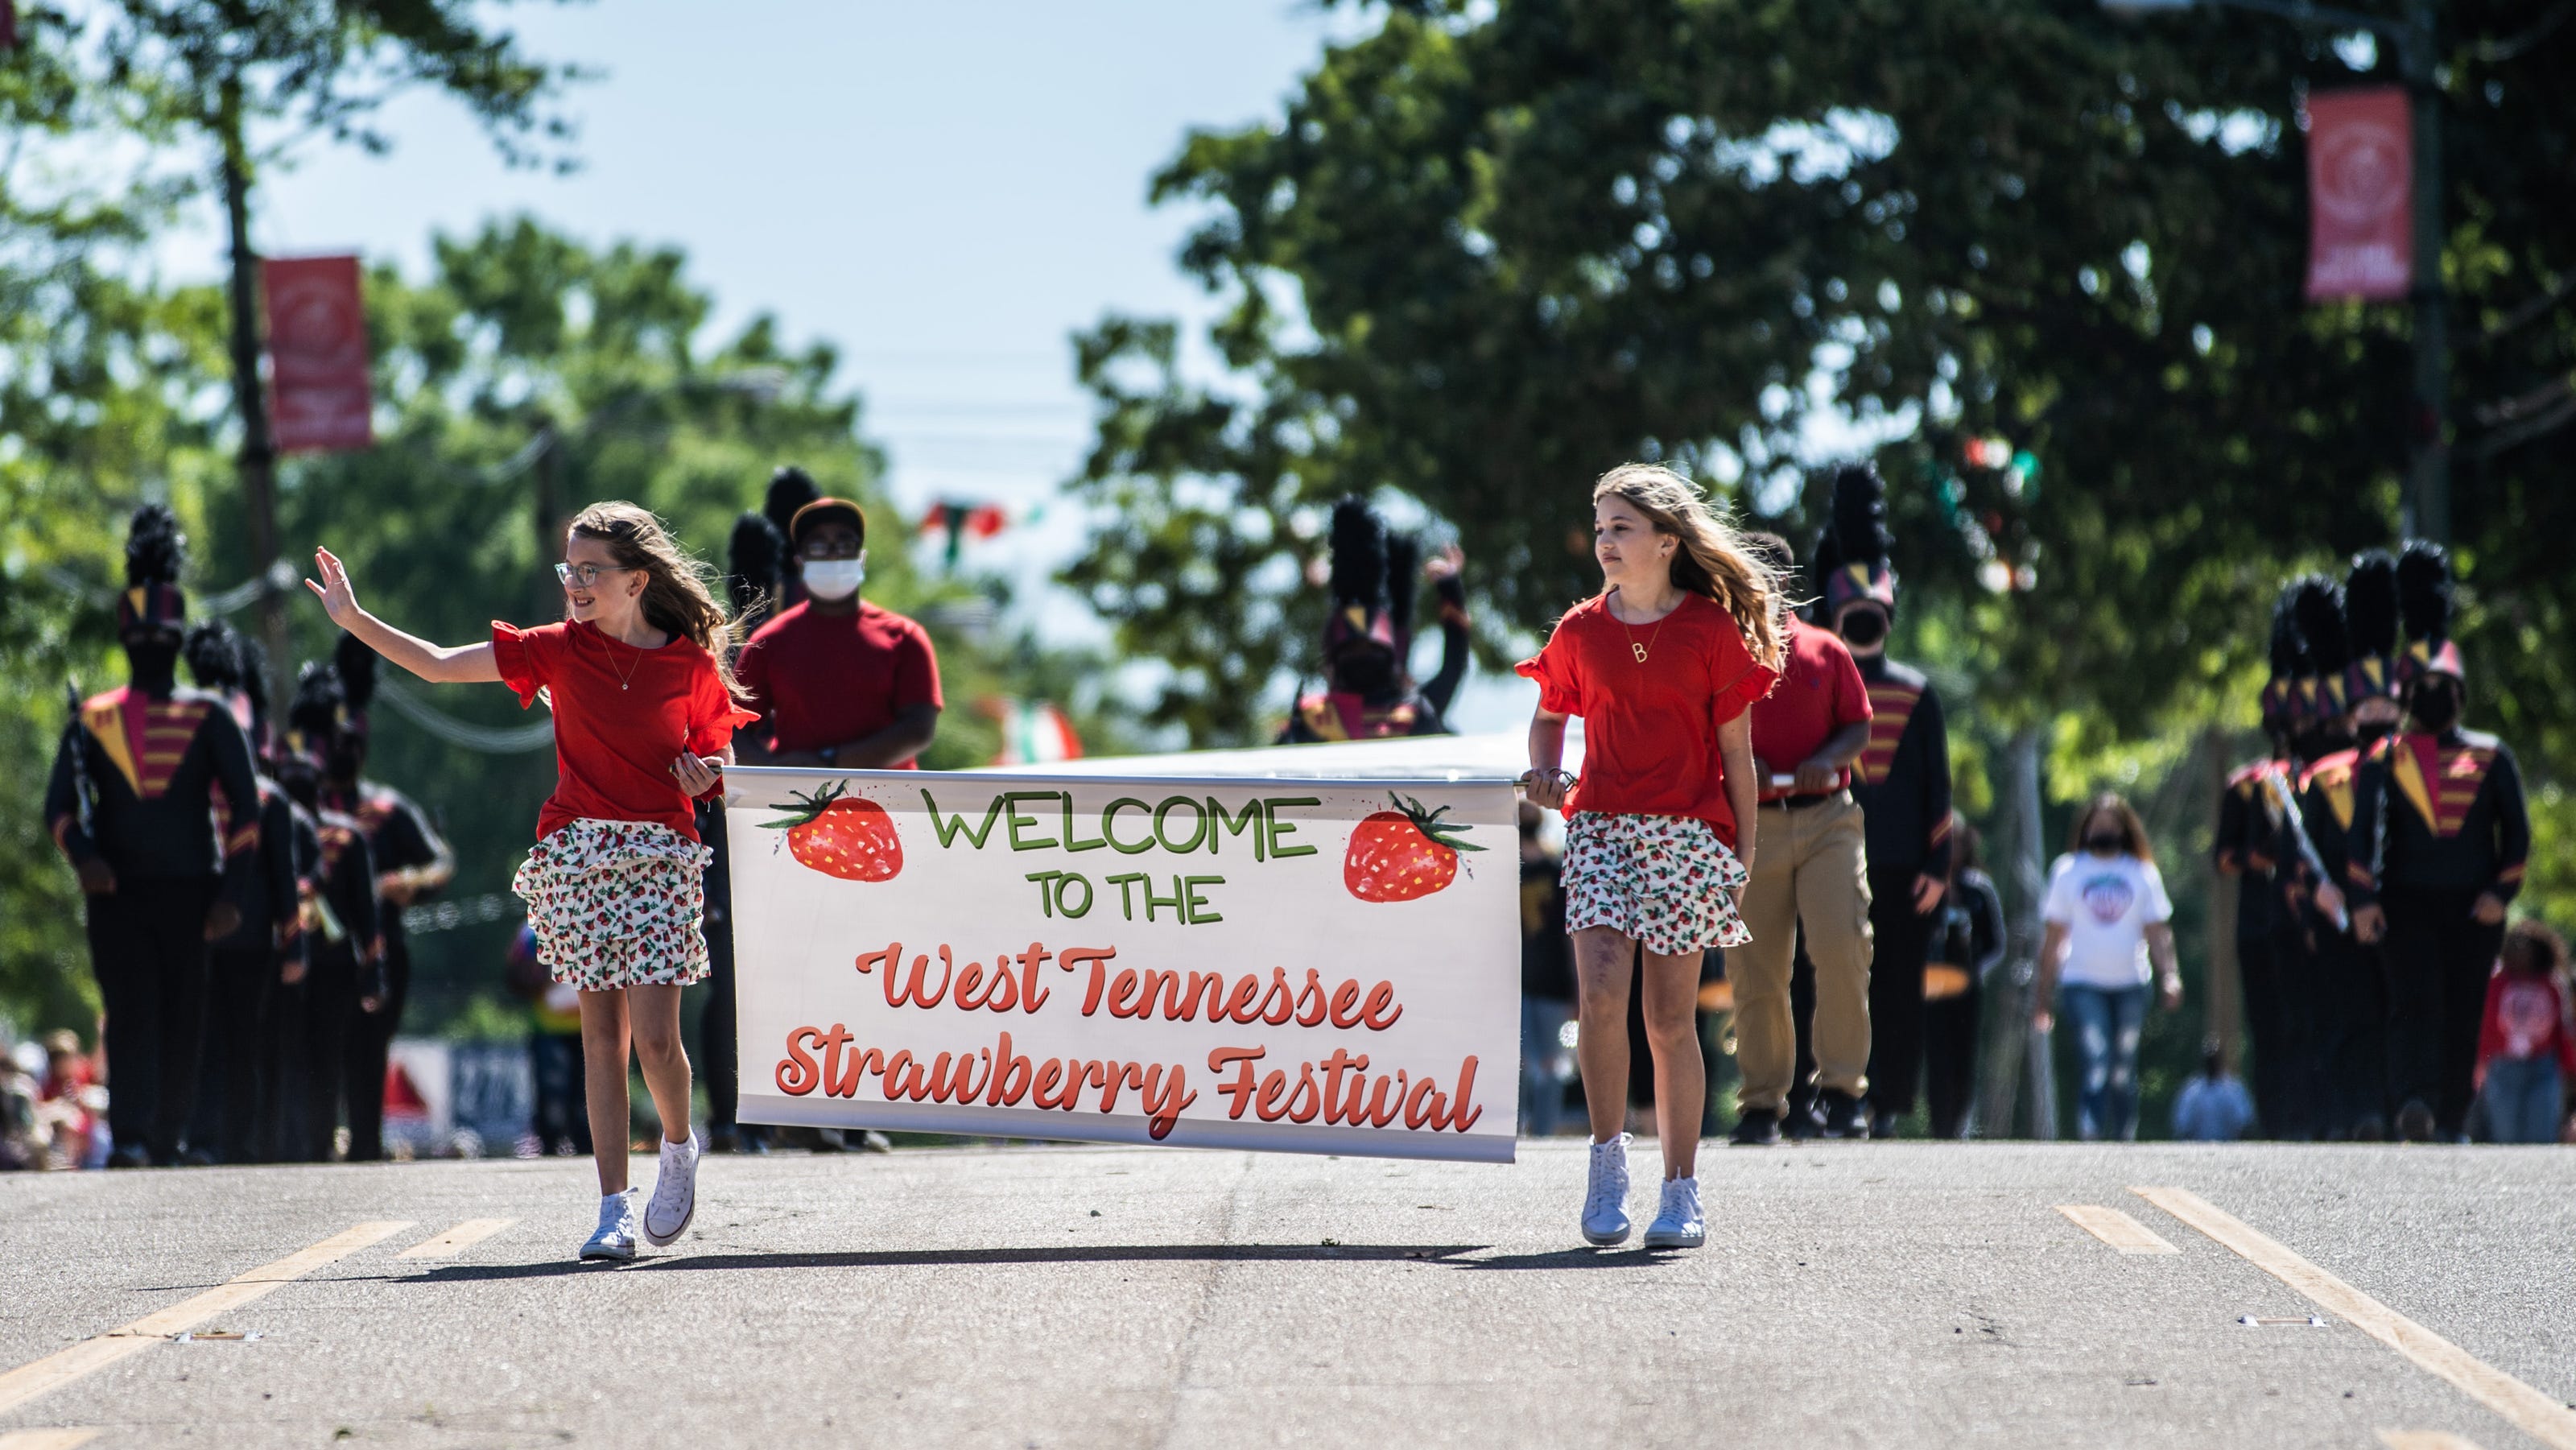 West Tennessee Strawberry Festival, 84th Annual, longest running